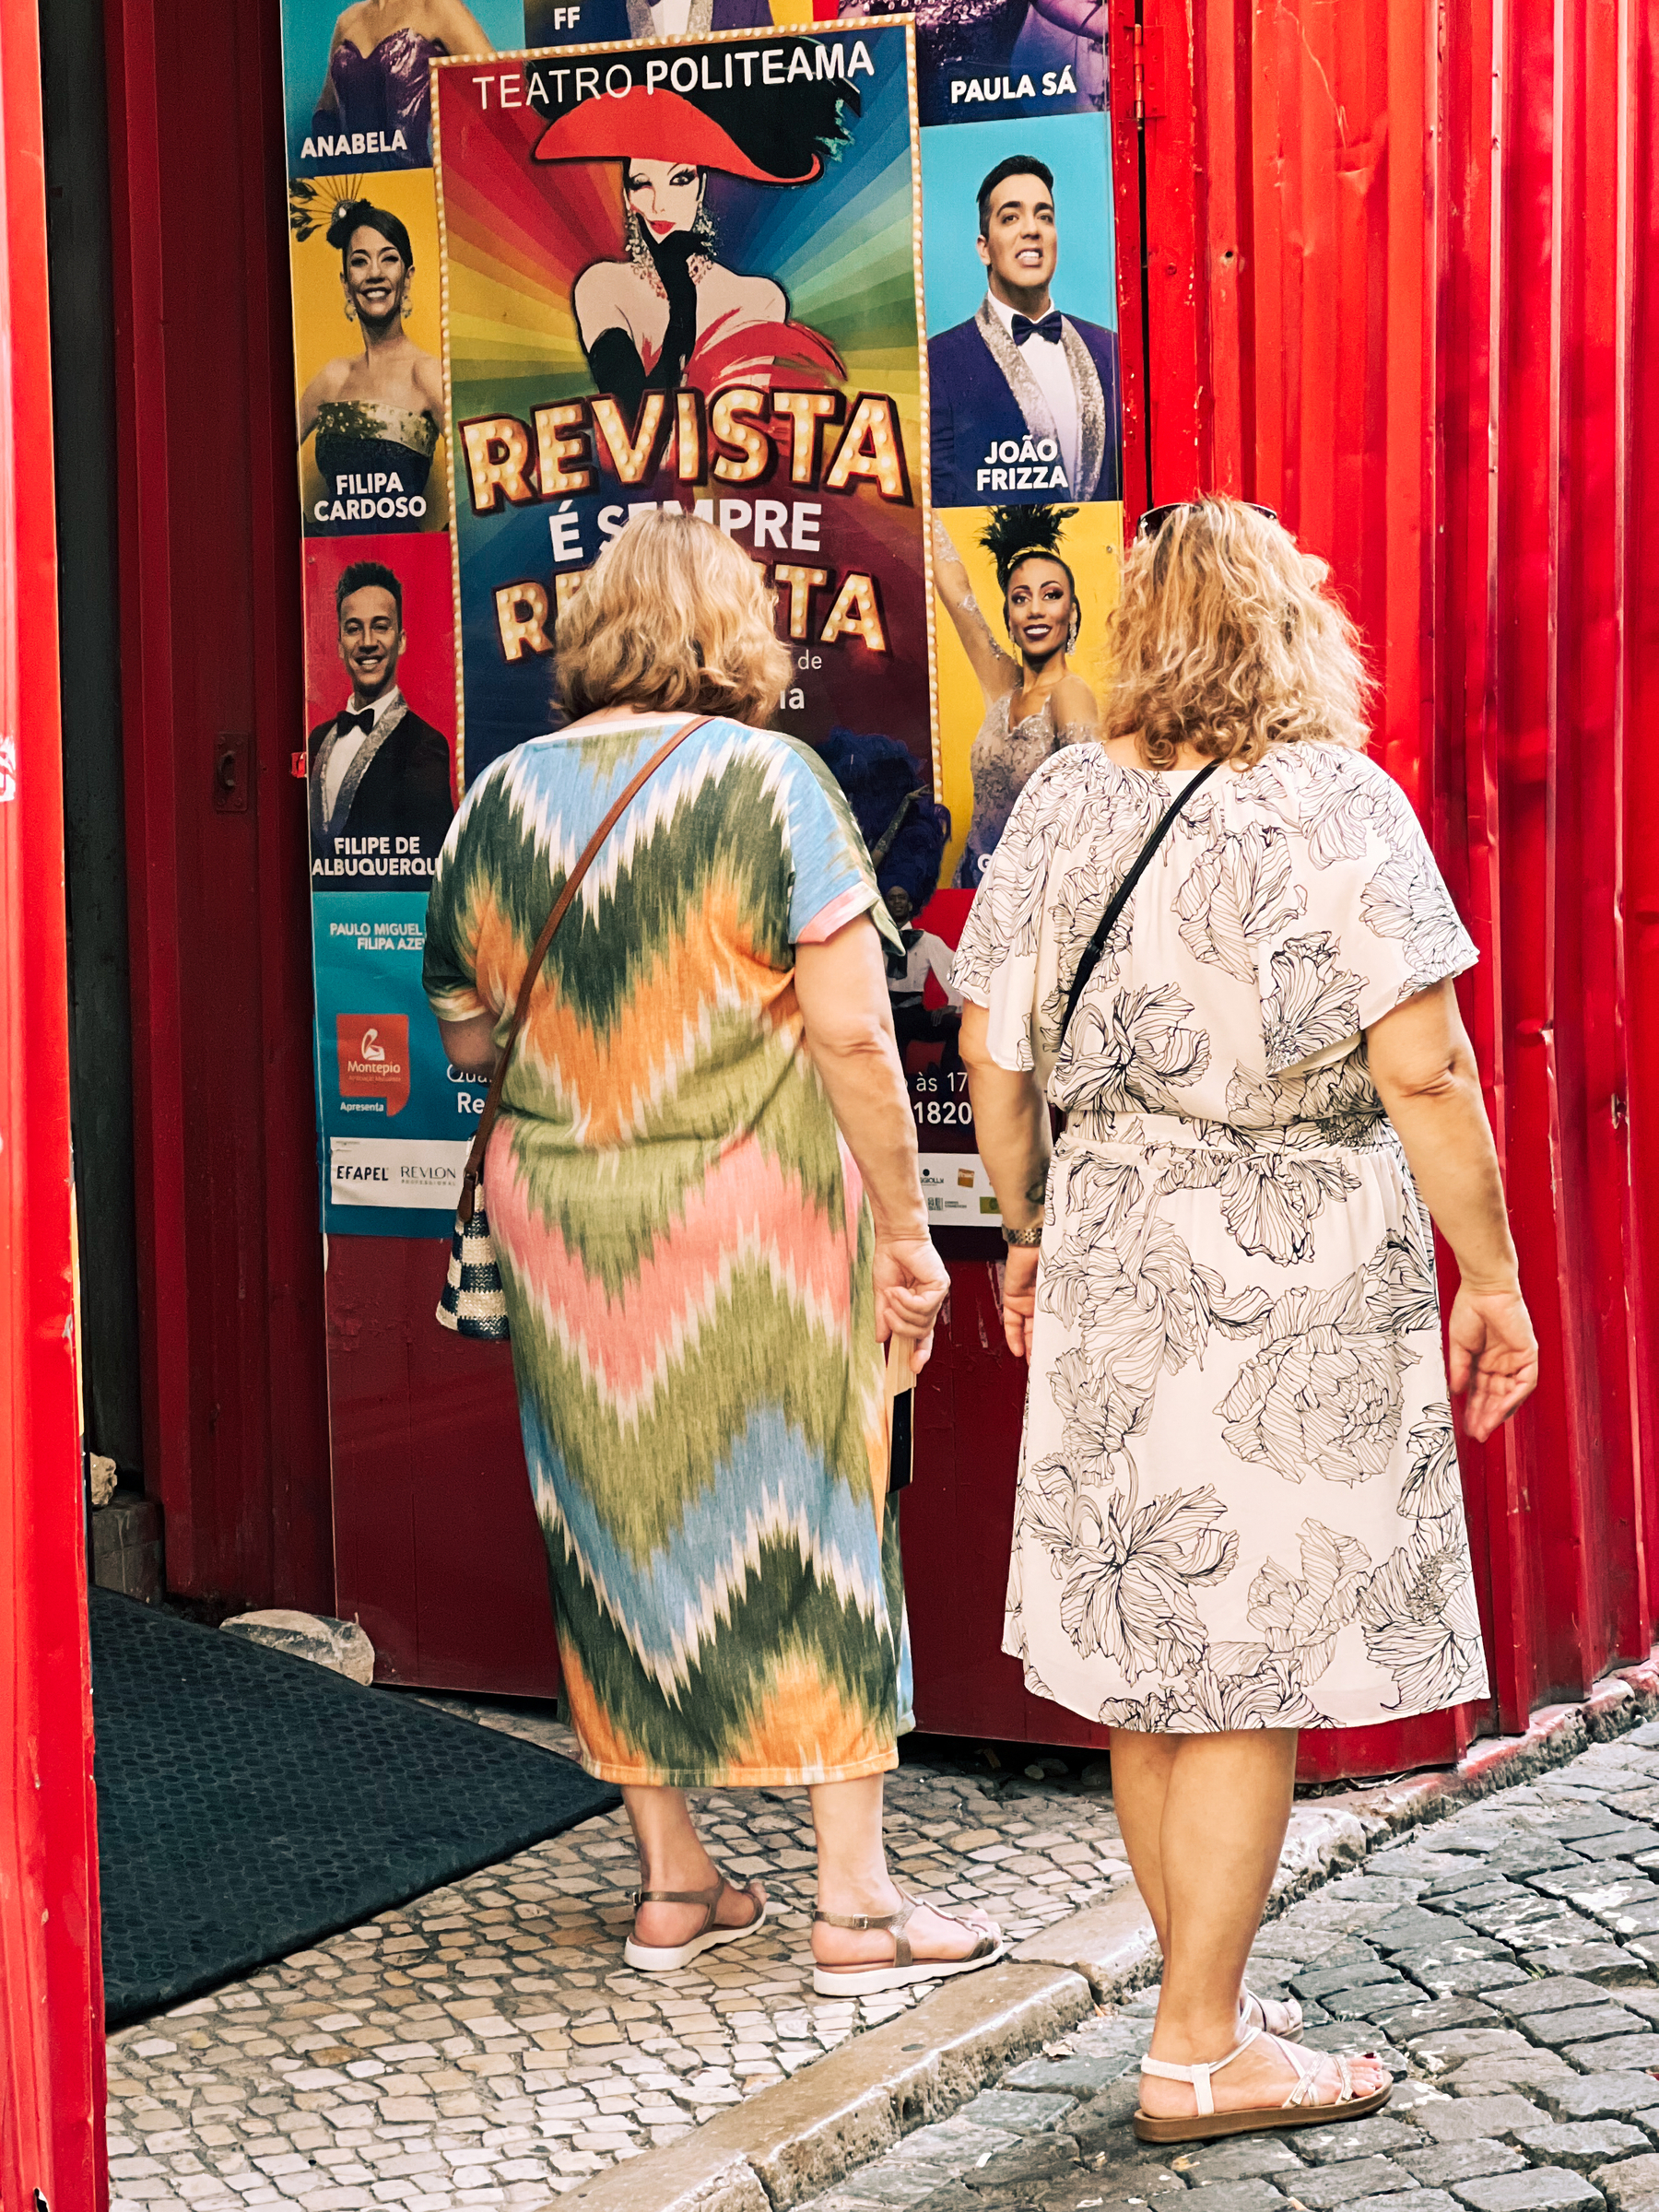 Two women look at a show’s poster on a red wall, their backs to us.